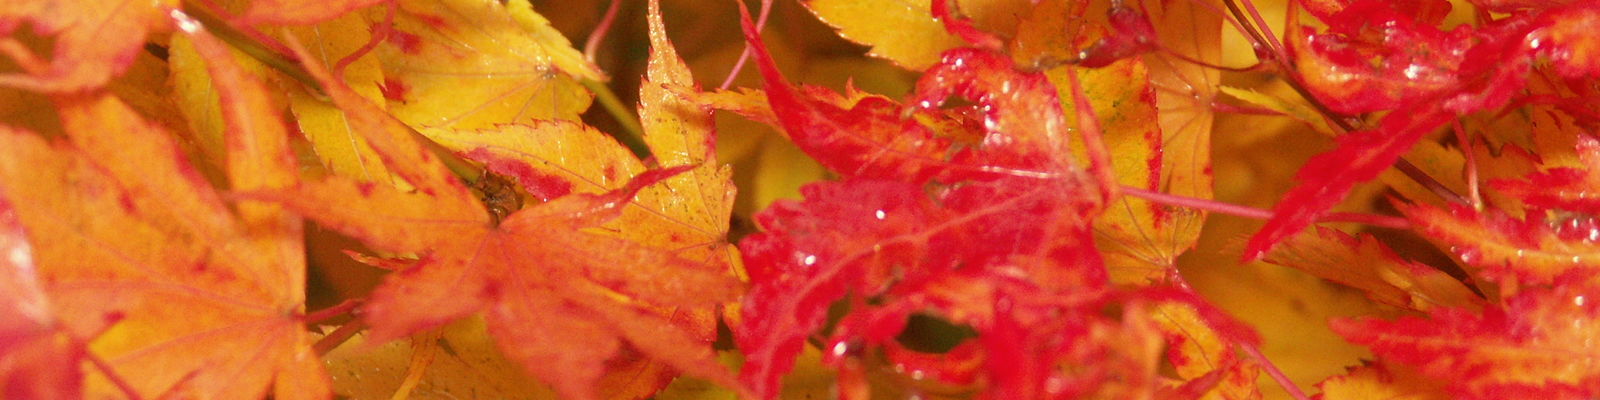 image of leaves in fall colors of orange and red